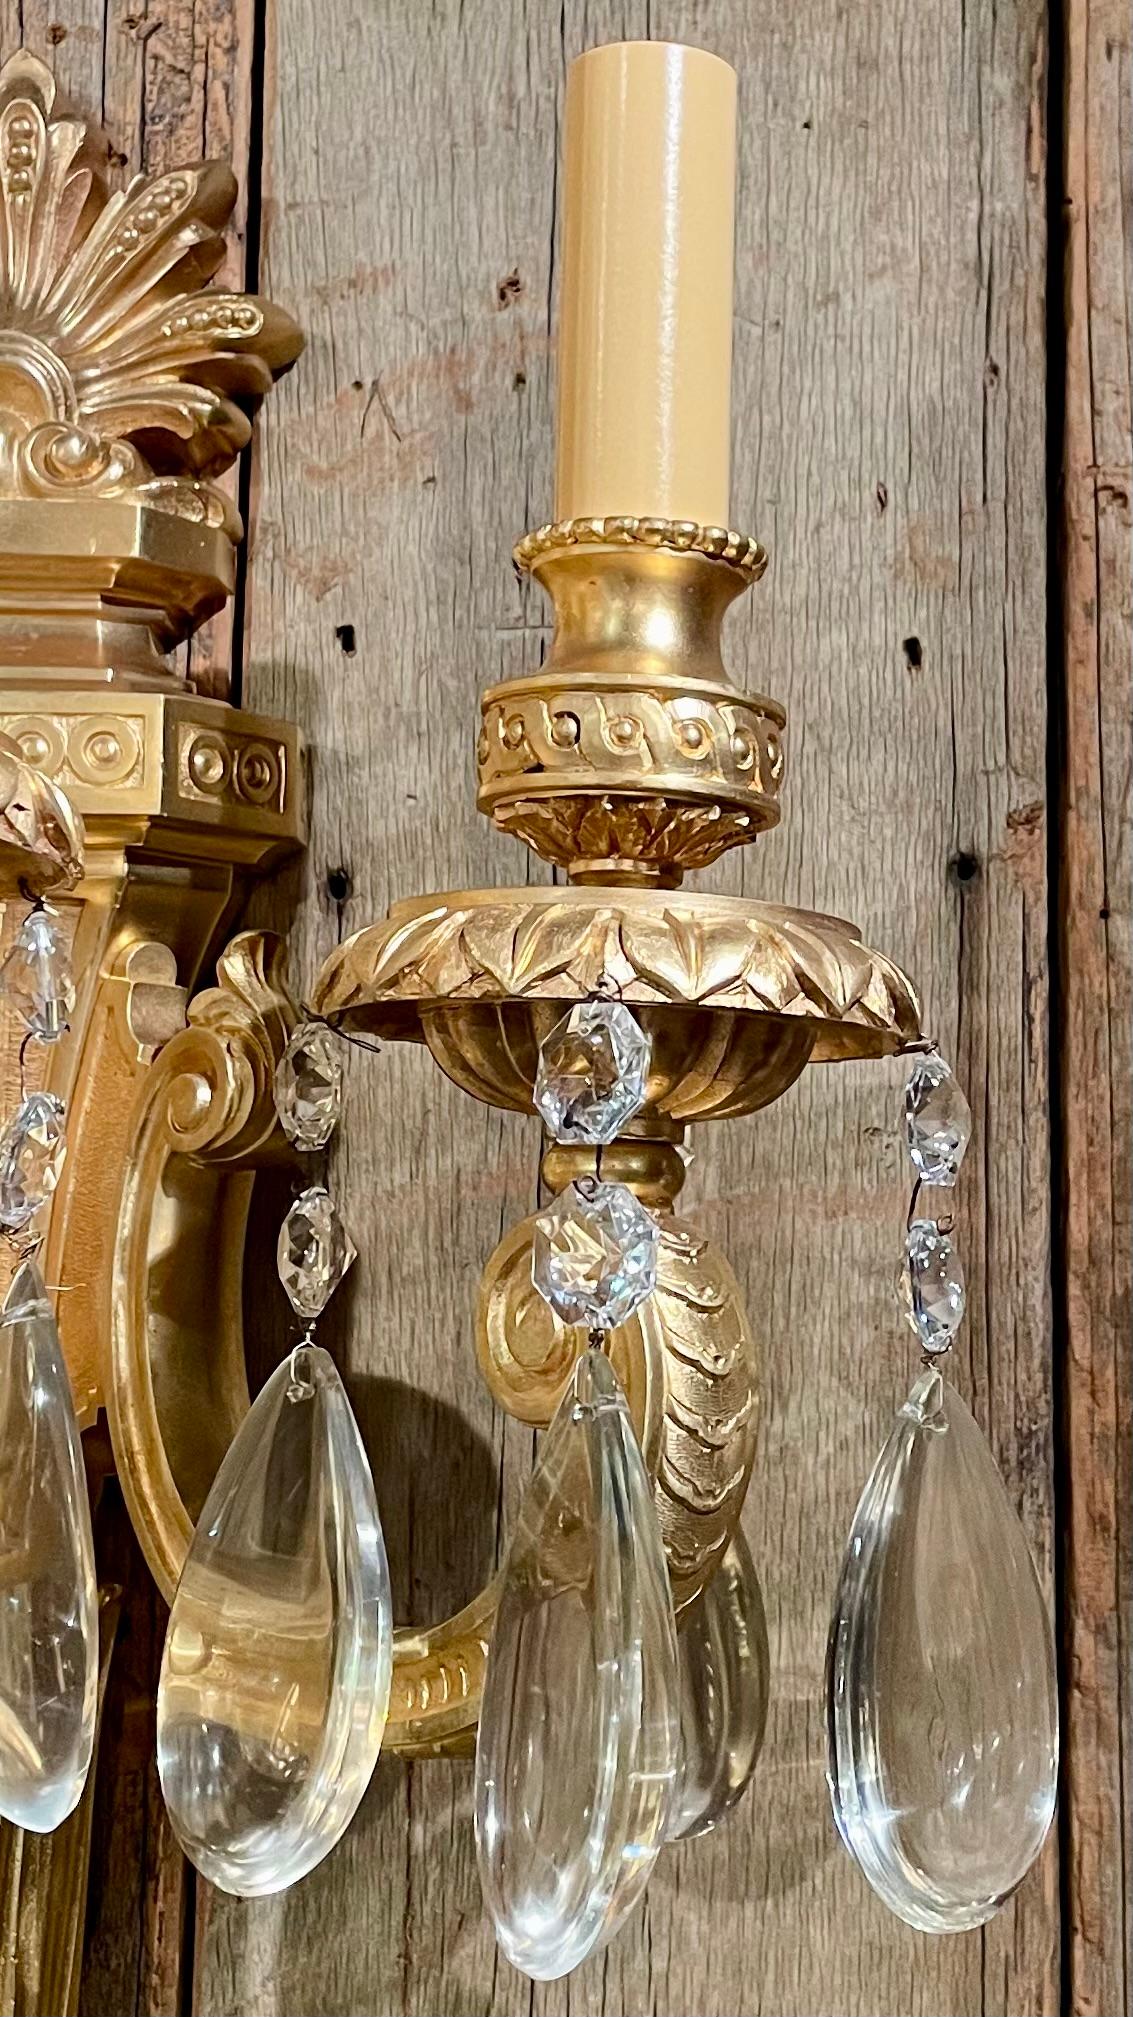 19th Century Pair of Antique French Regency Ormolu Chateau Lights / Sconces, Circa 1840-1850. For Sale